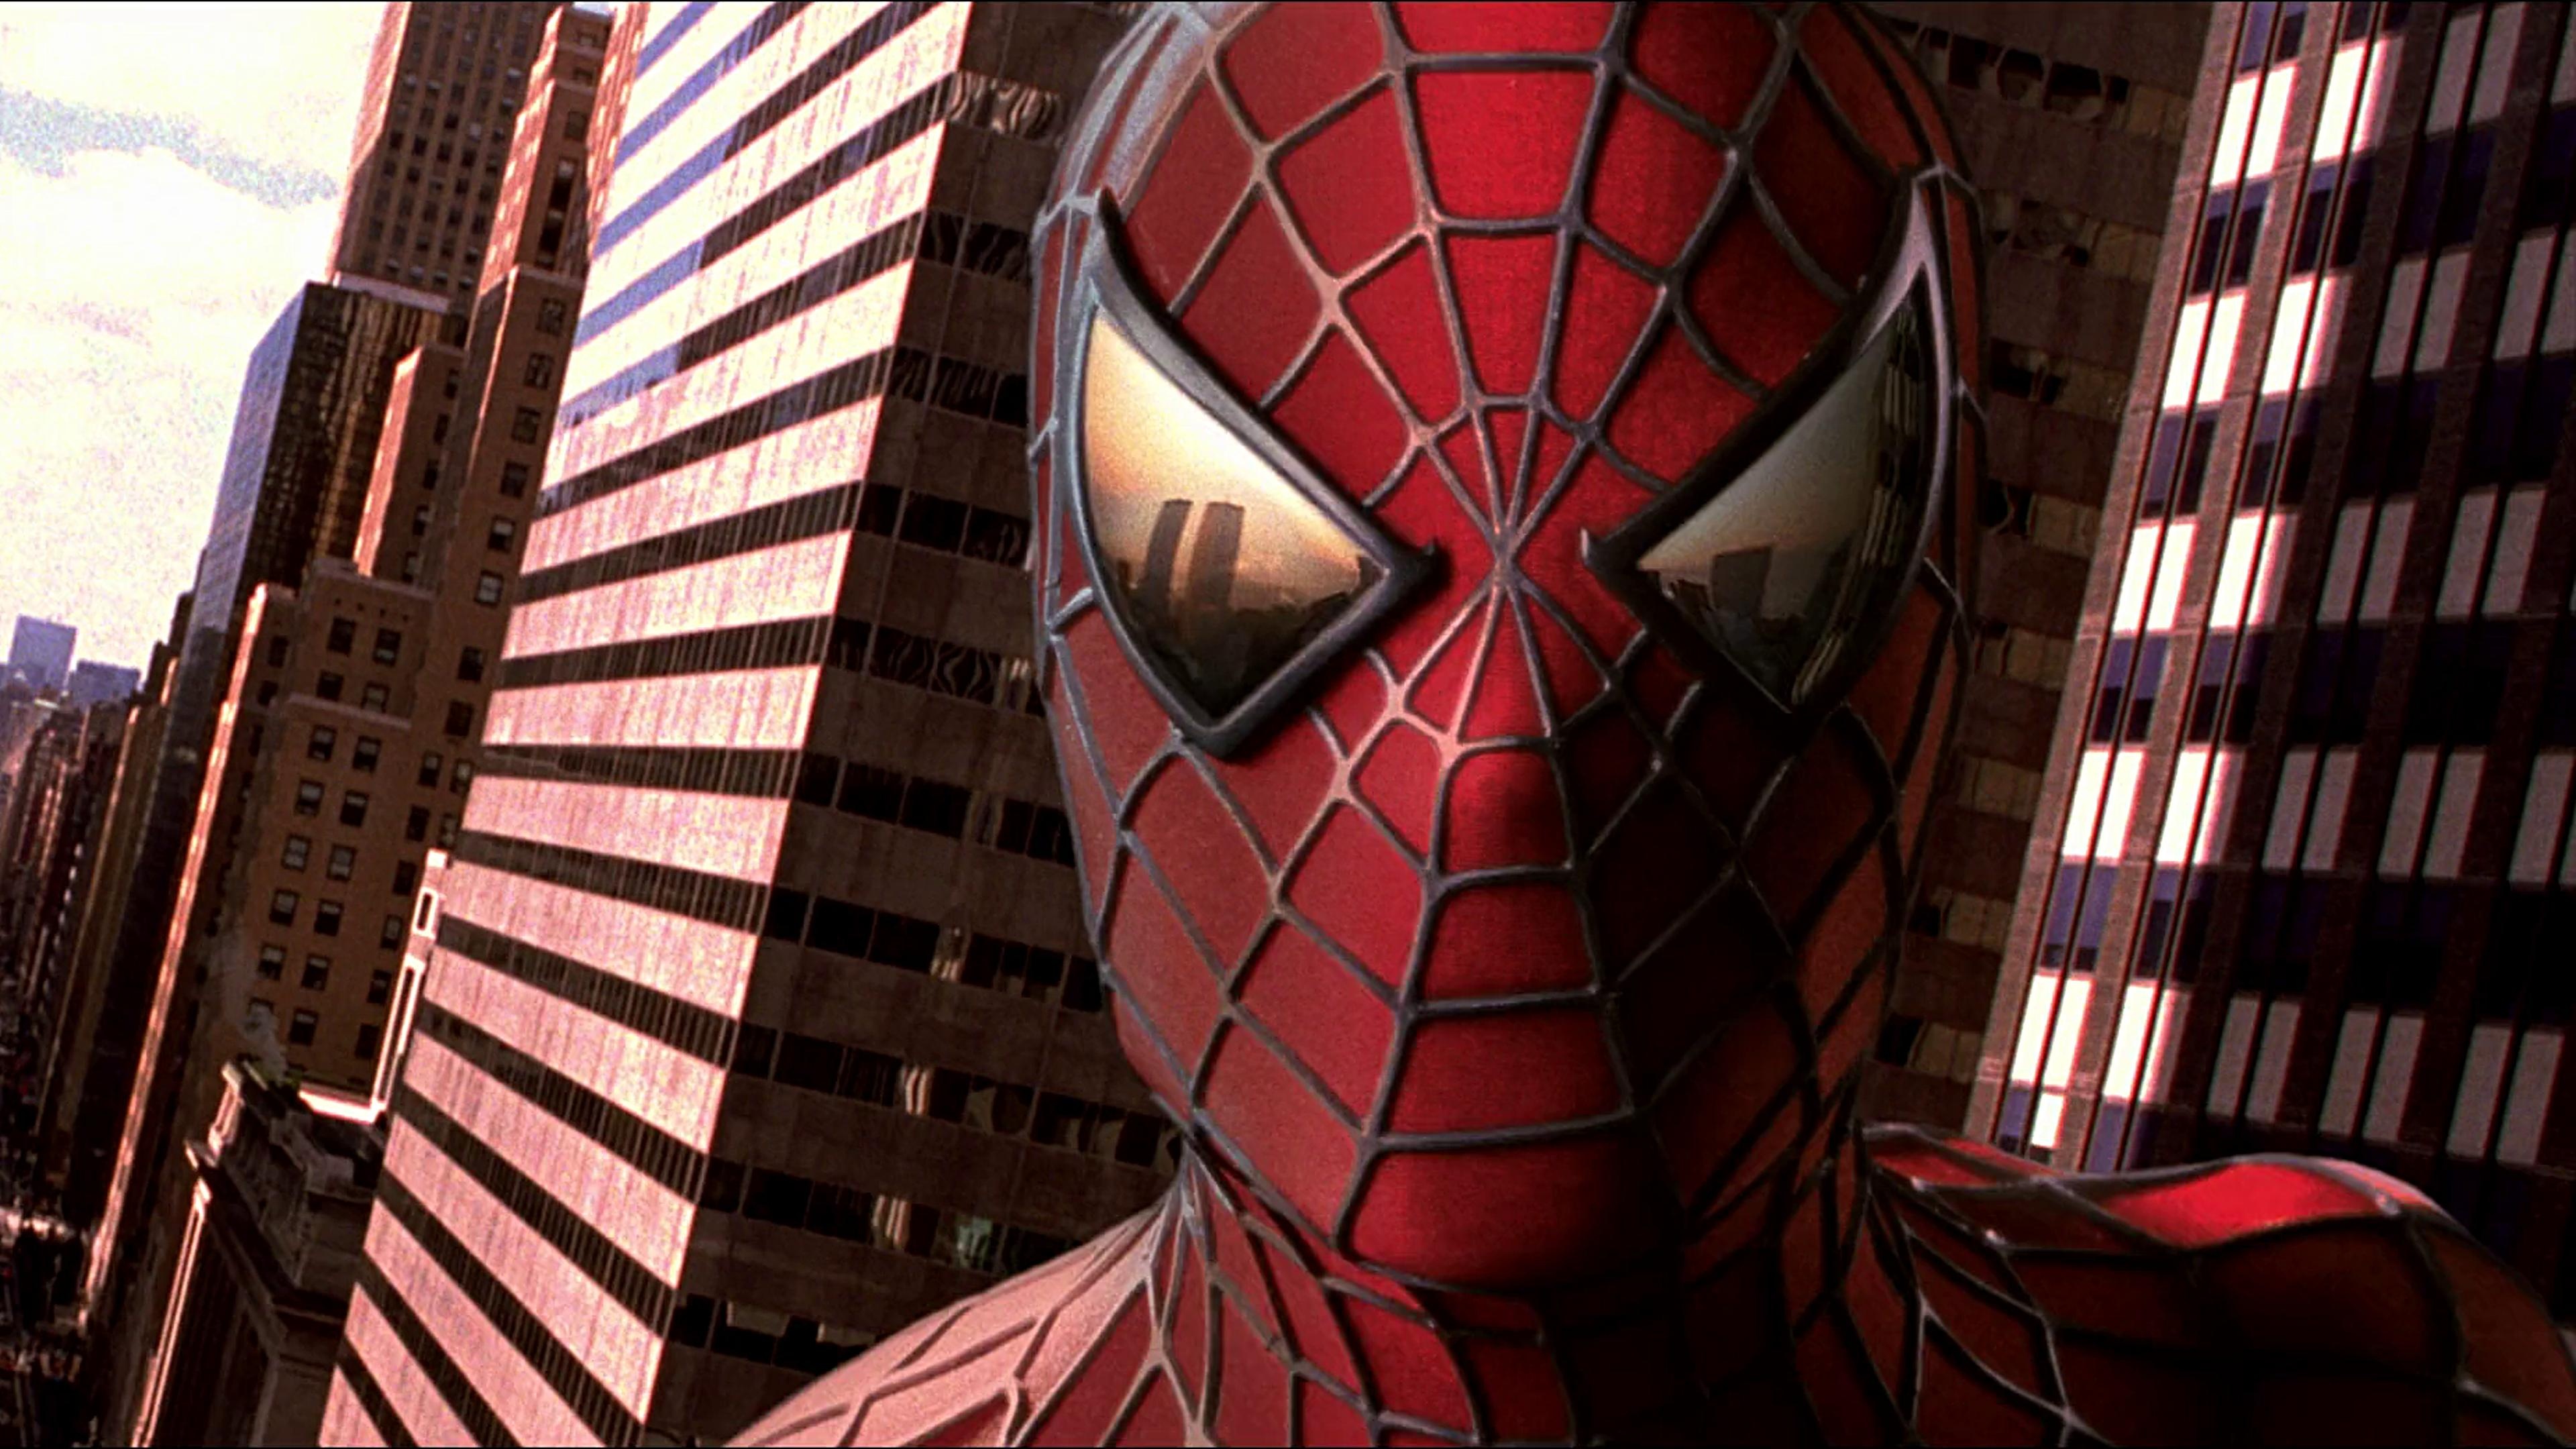 Tobey Maguire, Tobey Maguire trilogy, Nostalgic wallpapers, Spider-Man history, 3840x2160 4K Desktop